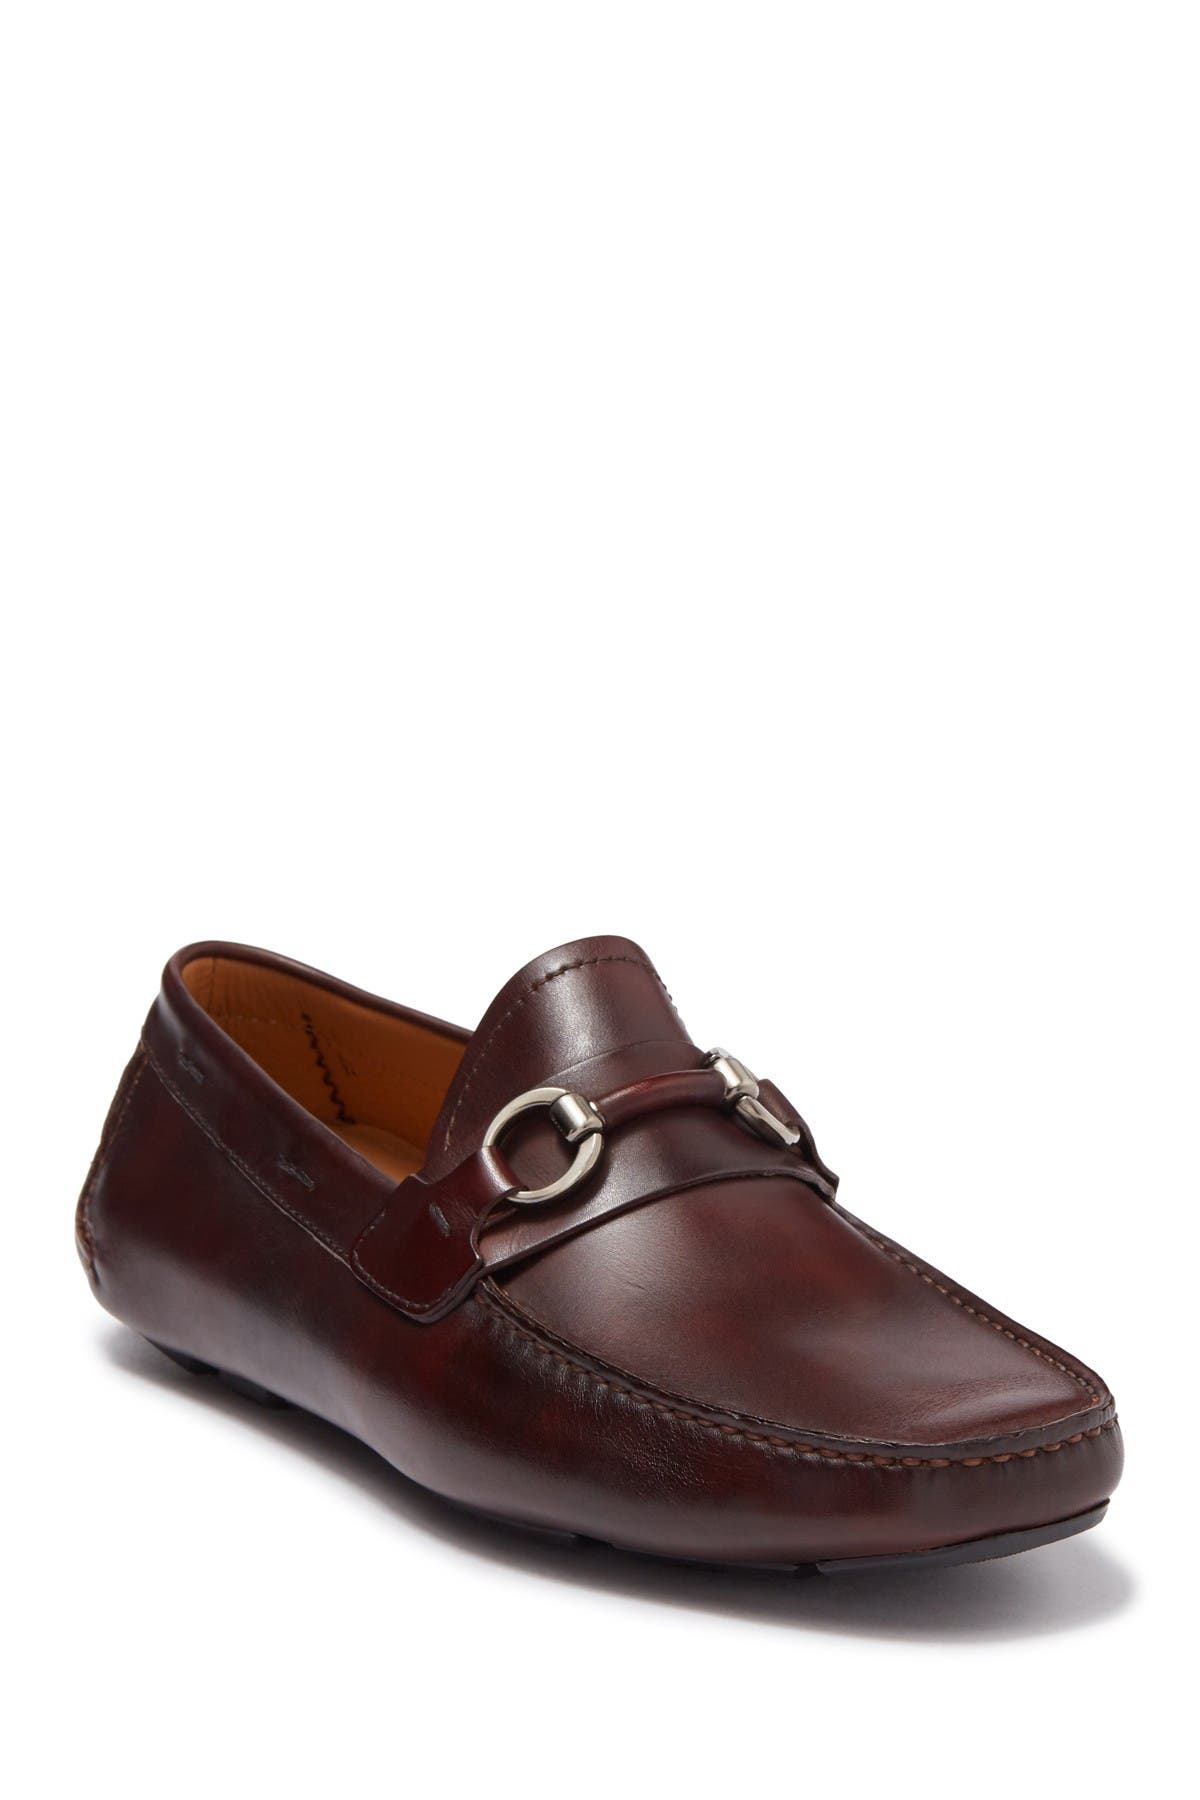 magnanni driving loafers